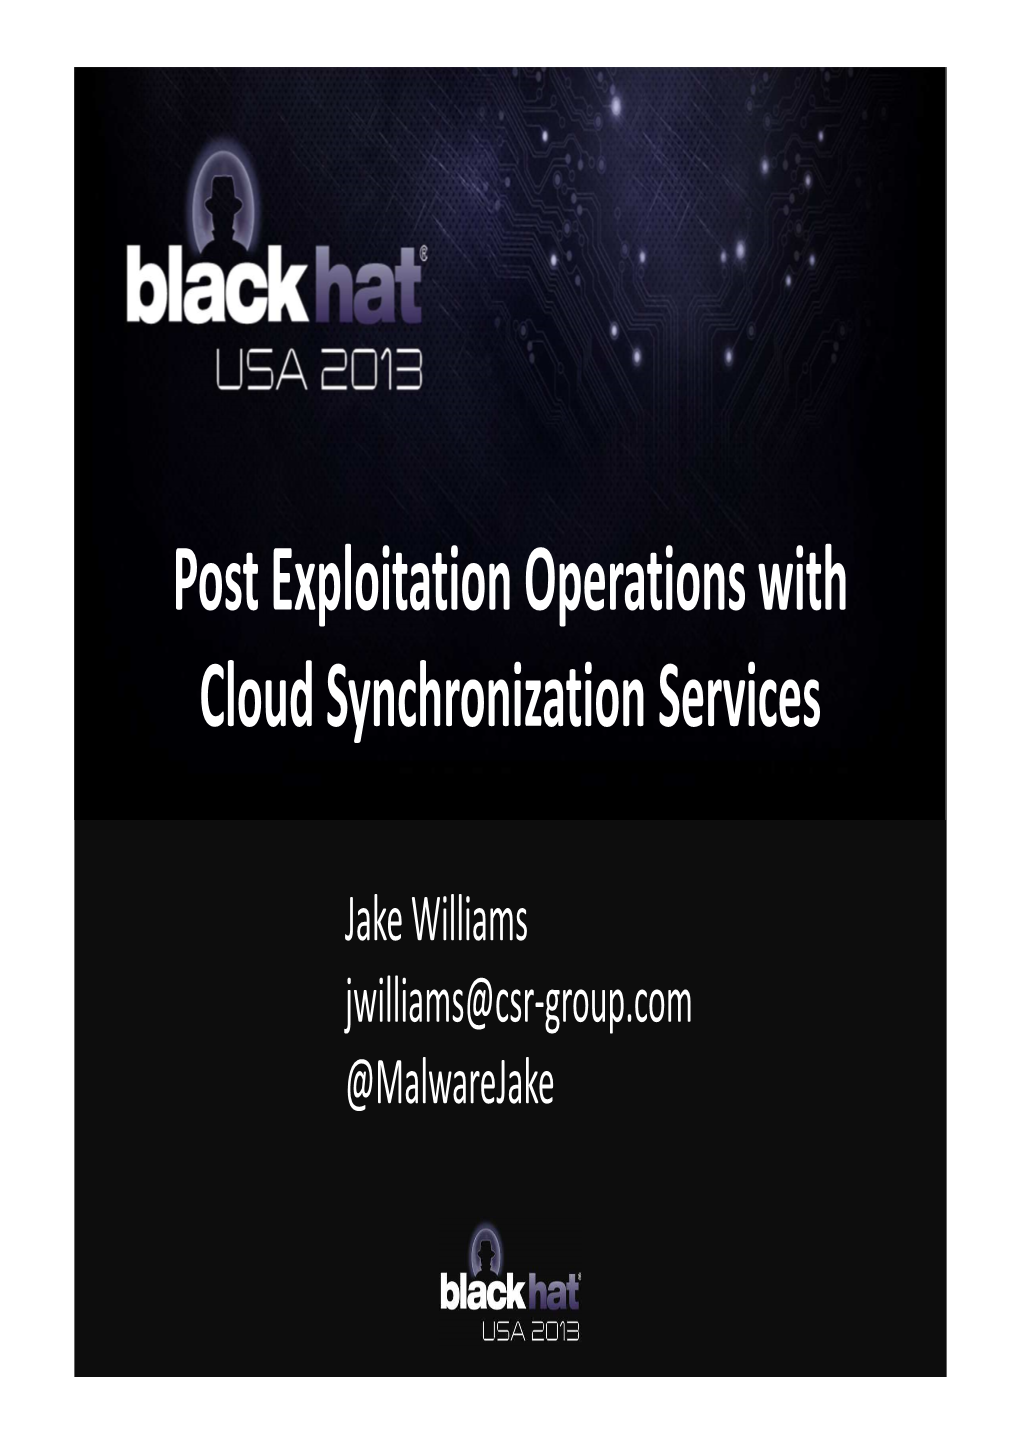 Post Exploitation Operations with Cloud Synchronization Services